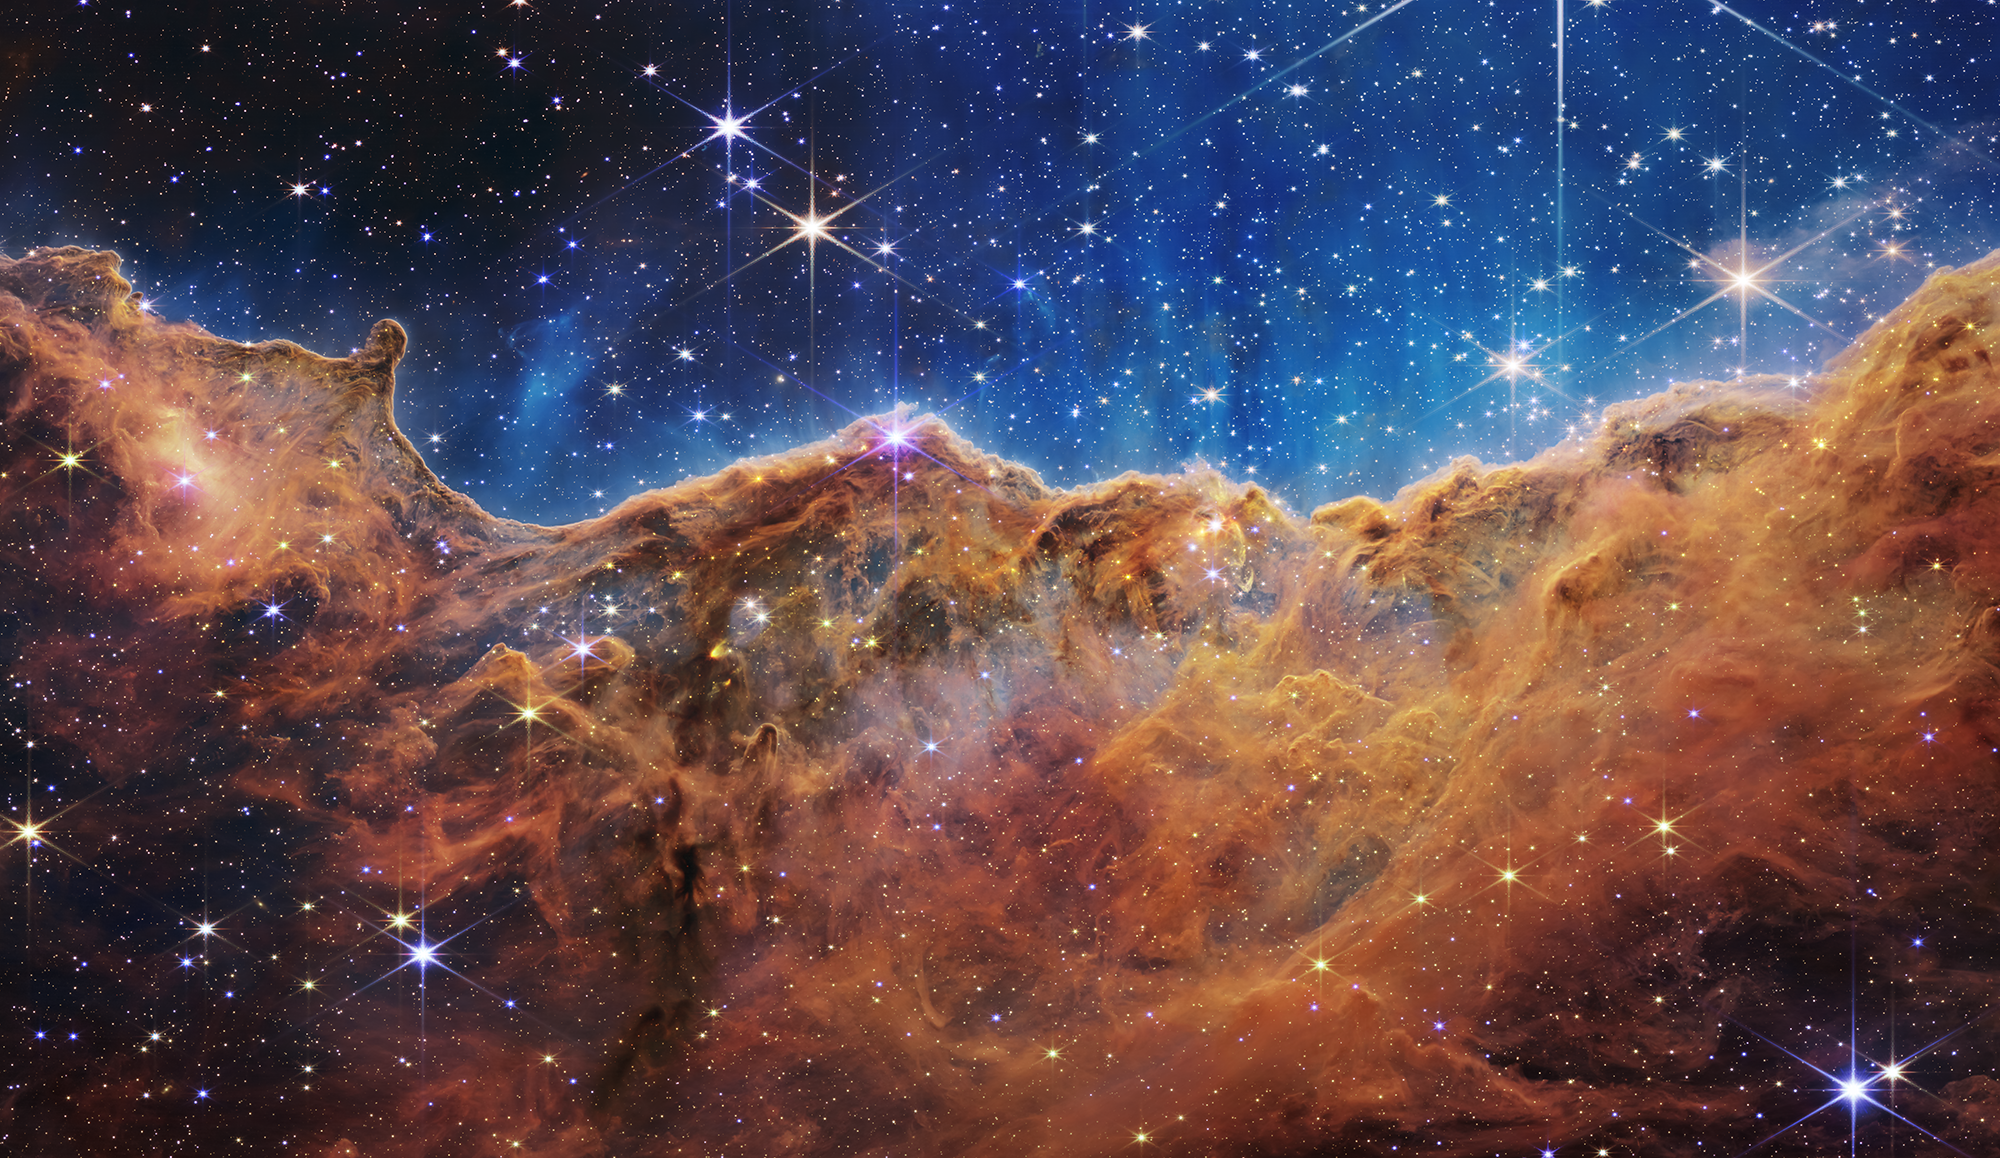 NASA's James Webb Space Telescope captured this image July 12, 2022, showing what NASA describes as "the edge of a nearby, young, star-forming region called NGC 3324 in the Carina Nebula." (Flickr/ NASA's James Webb Space Telescope, CC BY 2.0)